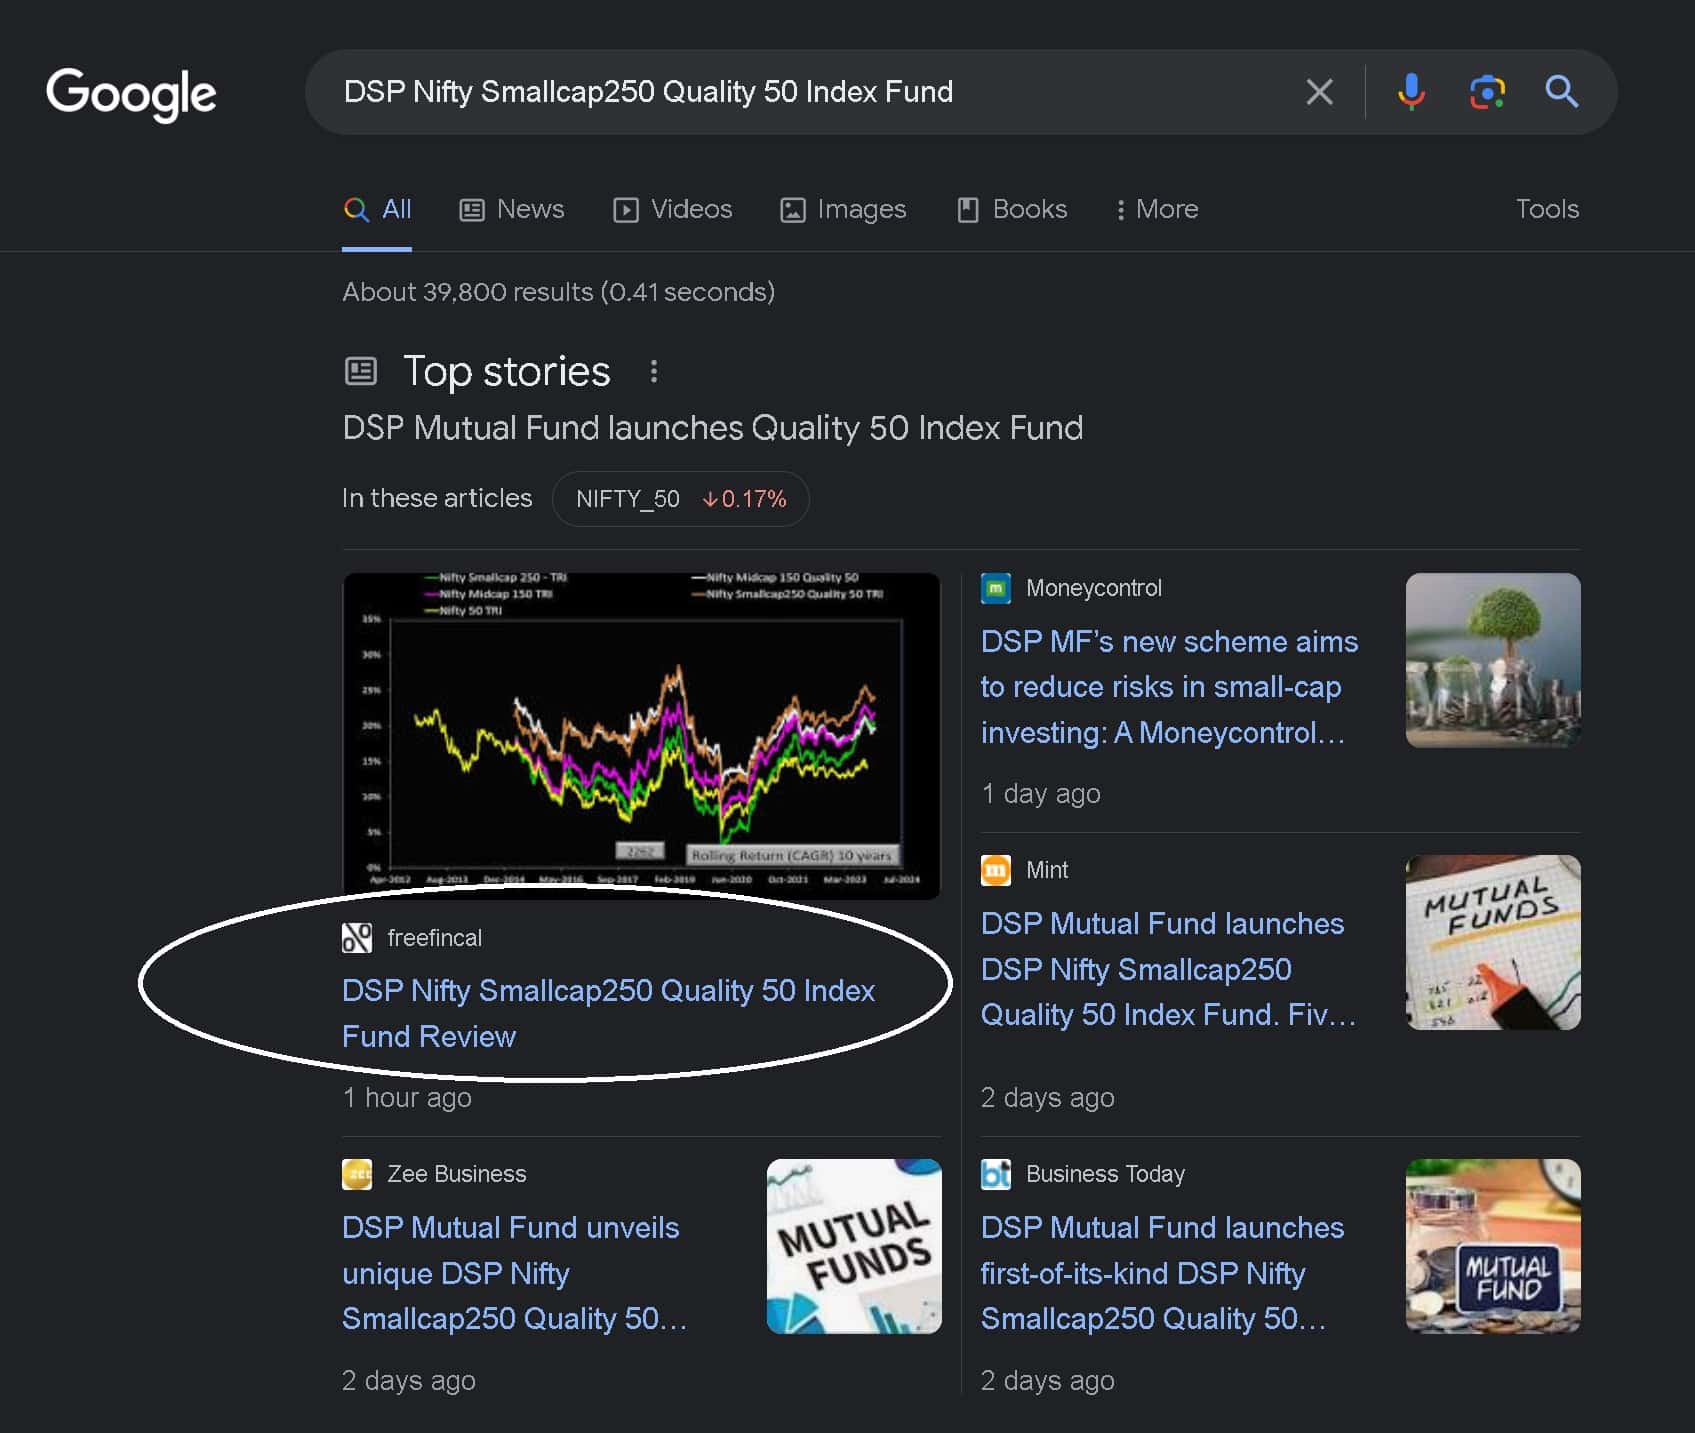 Freefincal in the Top Stories of Google News.